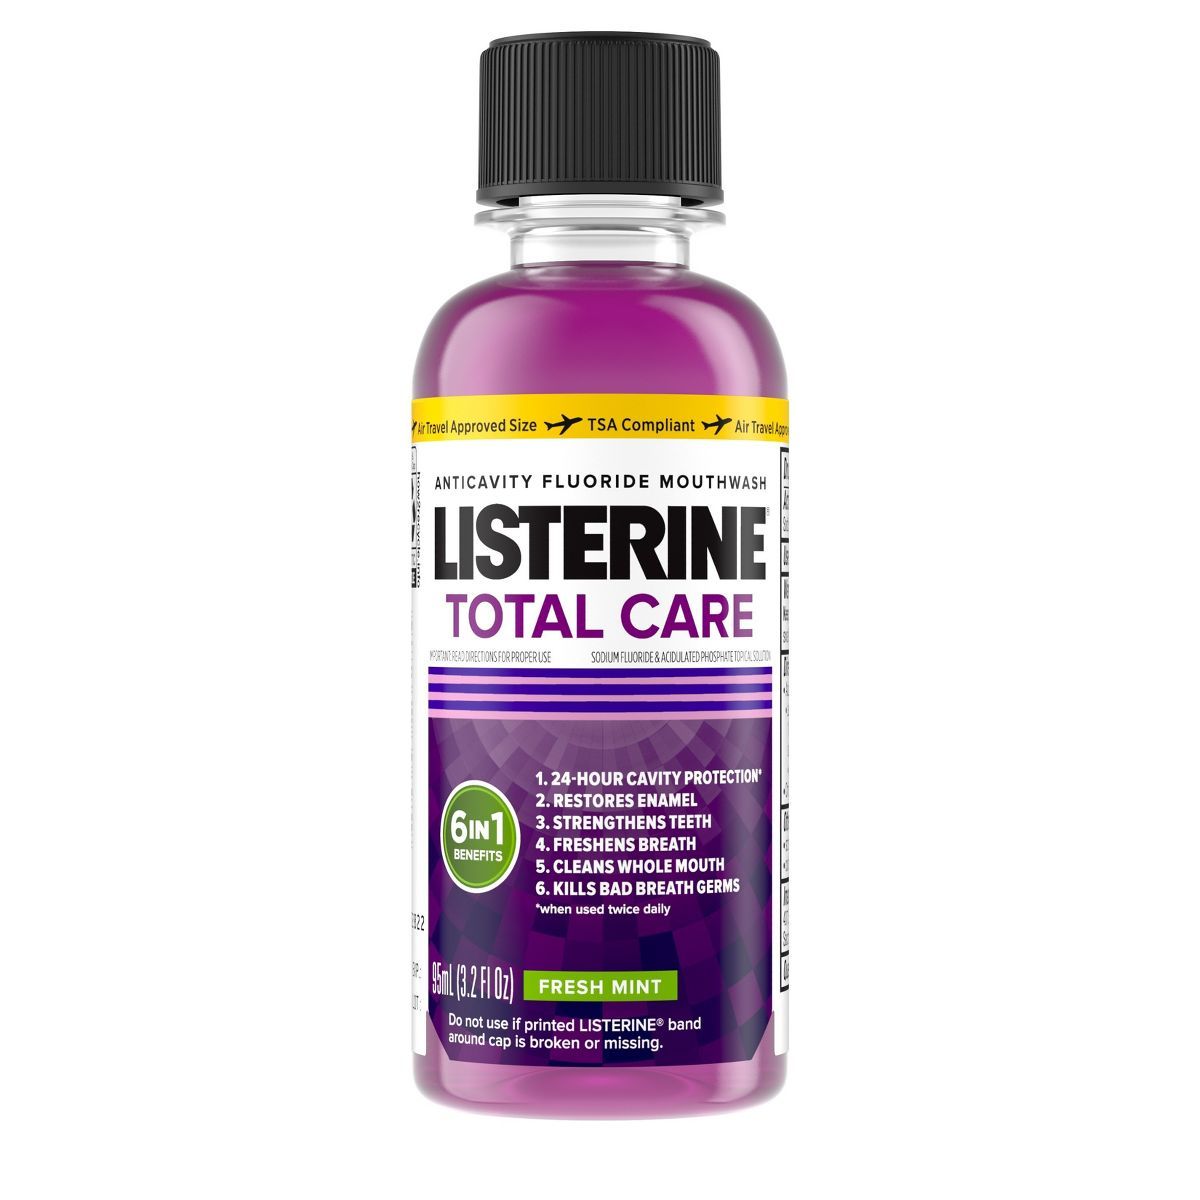 Listerine Total Care Fresh Mint Anticavity Mouthwash for Bad Breath and Enamel Strength | Target